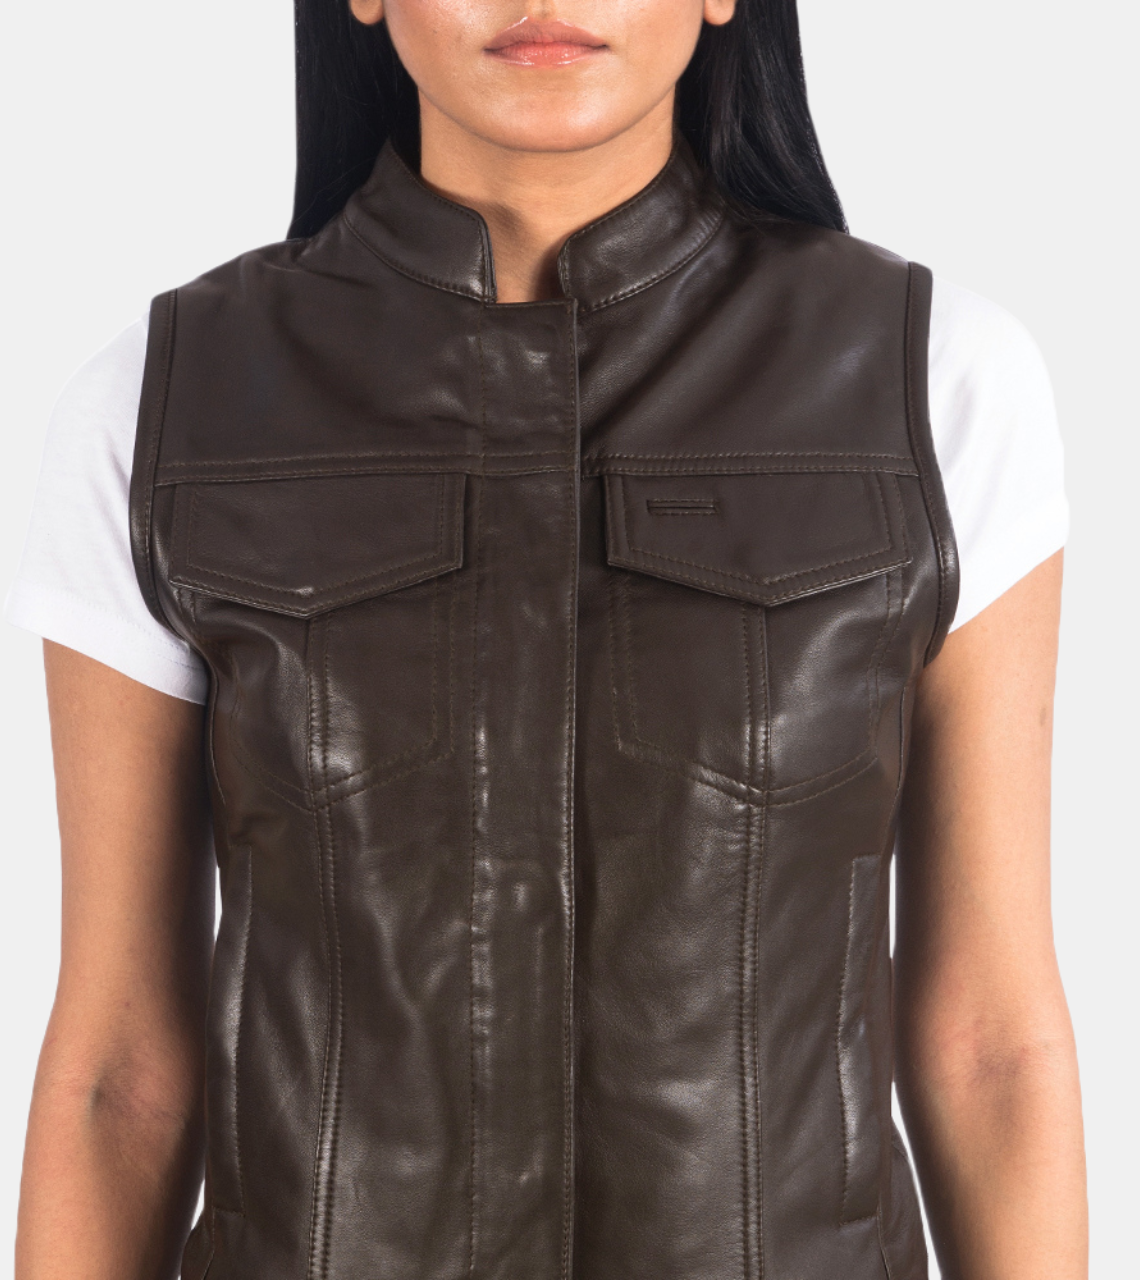 Clendy Brown Leather Vest For Women's